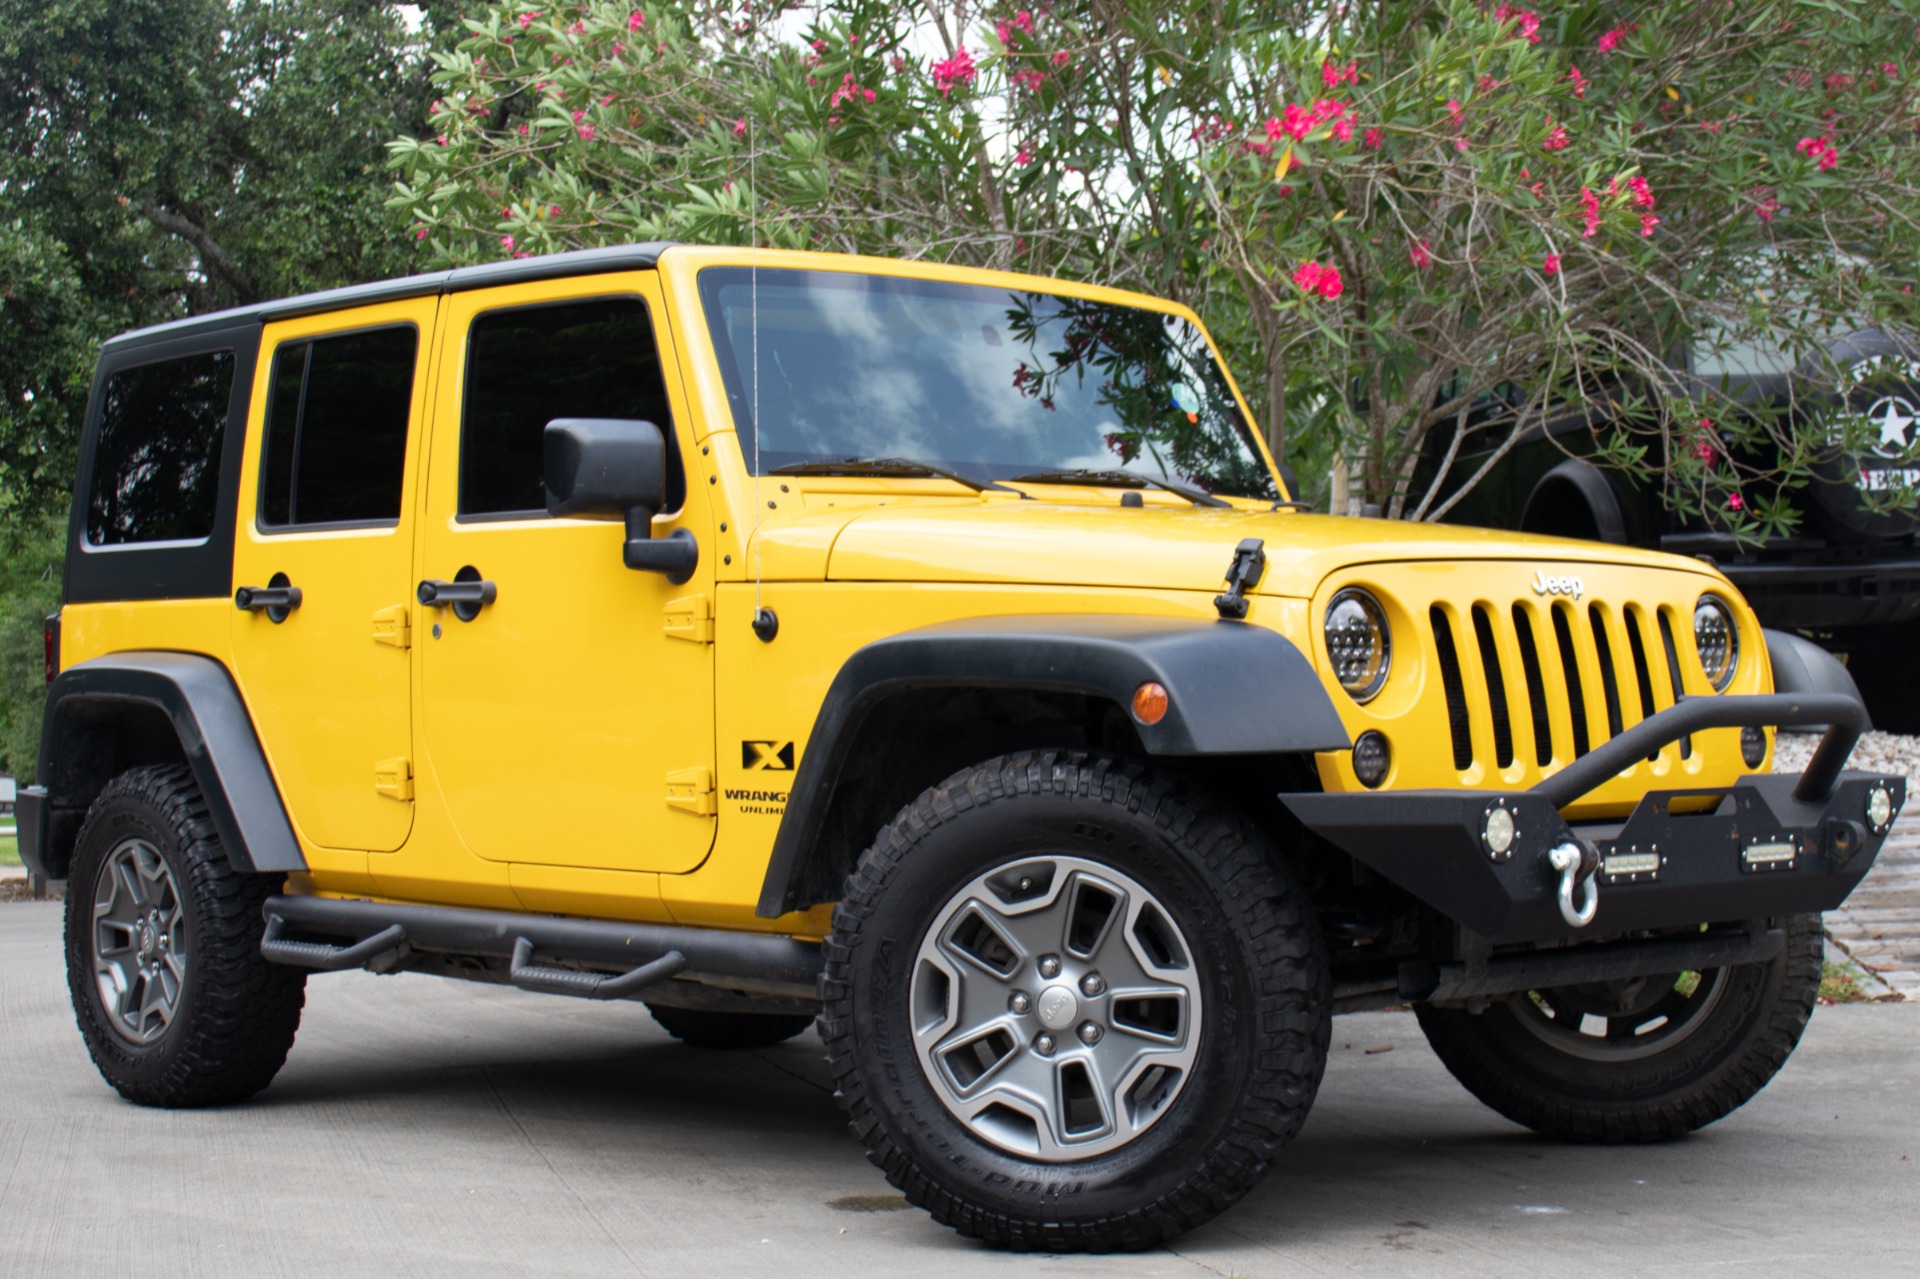 Used 2008 Jeep Wrangler Unlimited X For Sale ($16,995) | Select Jeeps Inc.  Stock #511448